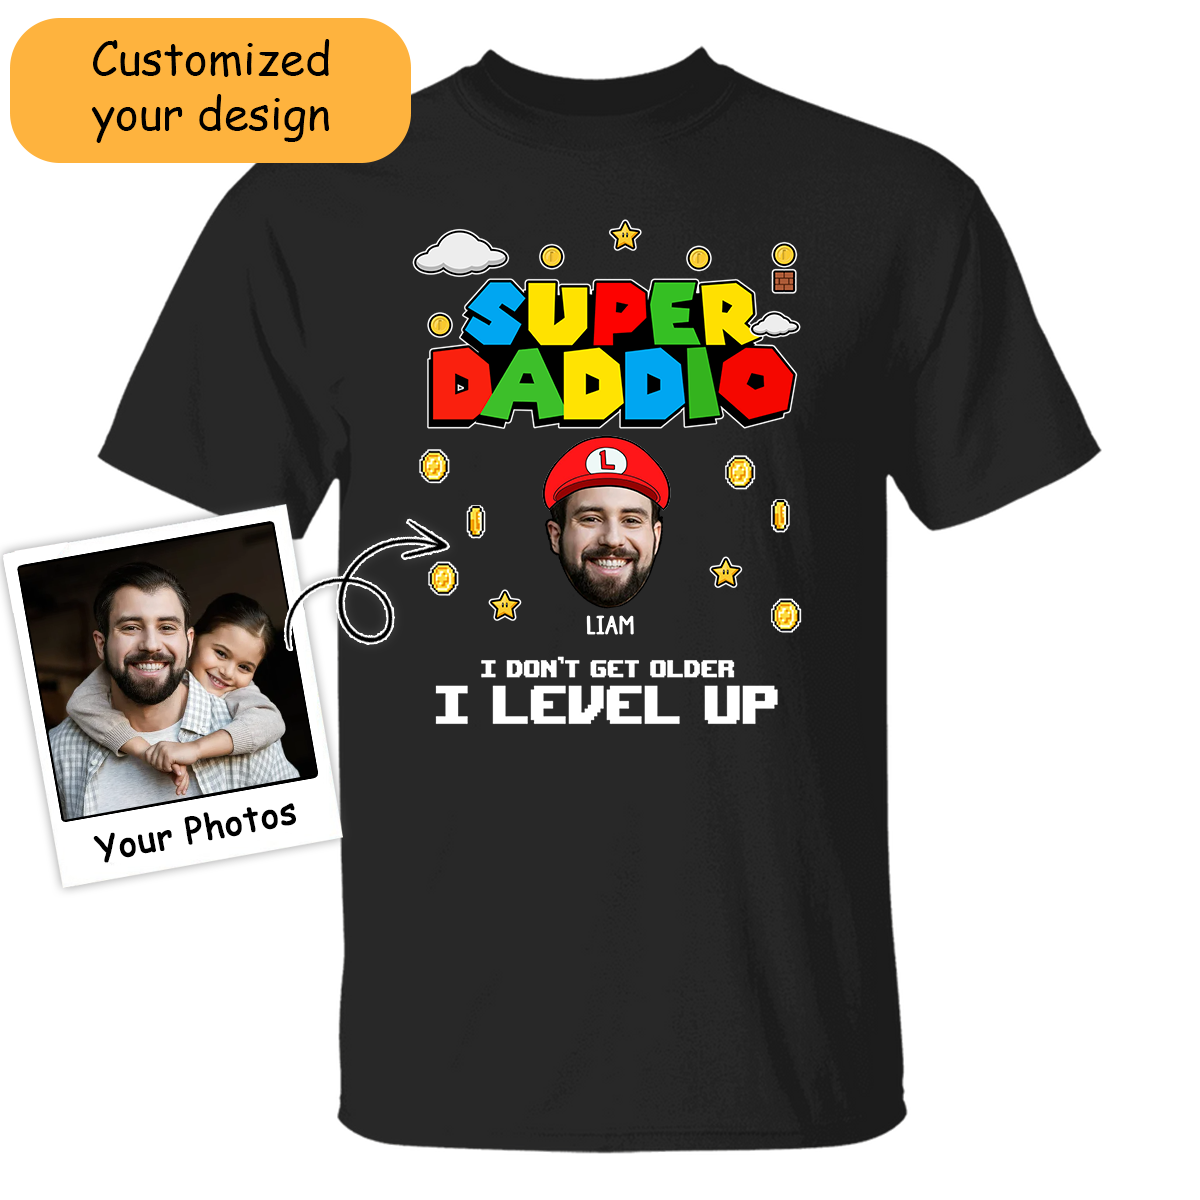 Customized Shirt Hoodie Super Daddio I Don't Get Older I Level Up For Dad, For Husband, For Father, Grandpa, Father's Day Gift